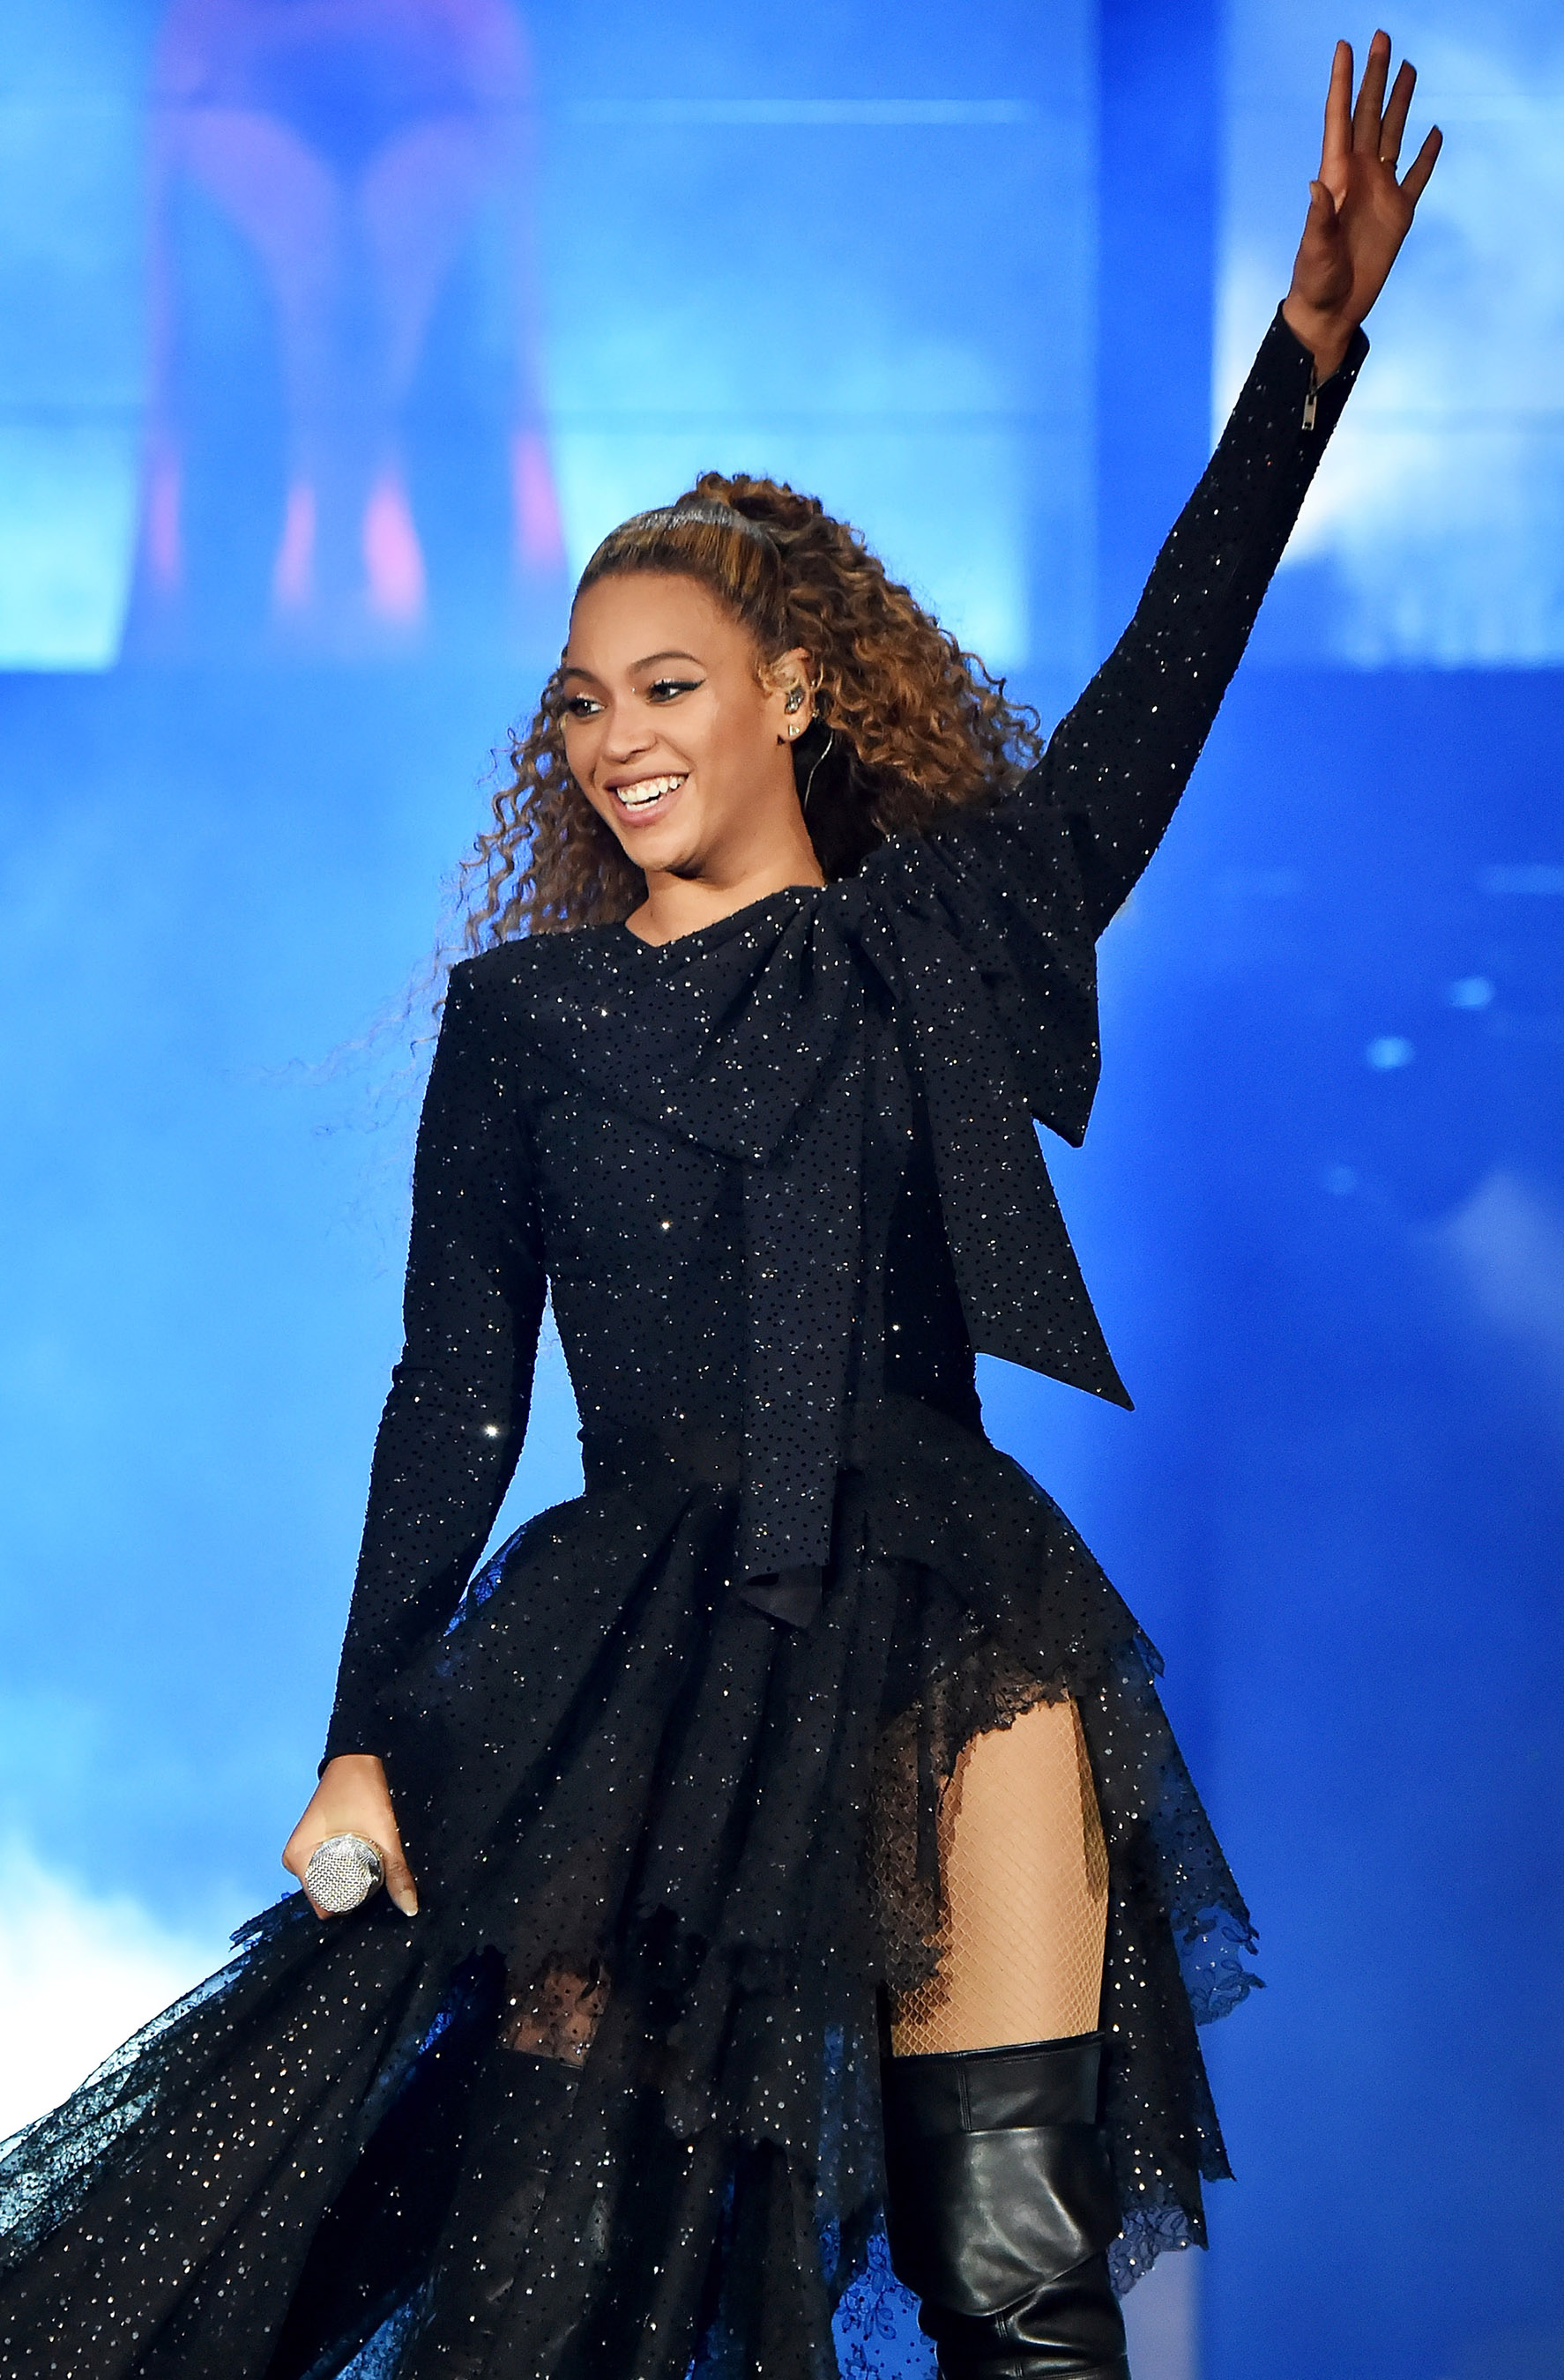 THE HOUSE OF GIVENCHY DRESSES BEYONCÉ AND JAY-Z FOR THEIR ON THE RUN II TOUR